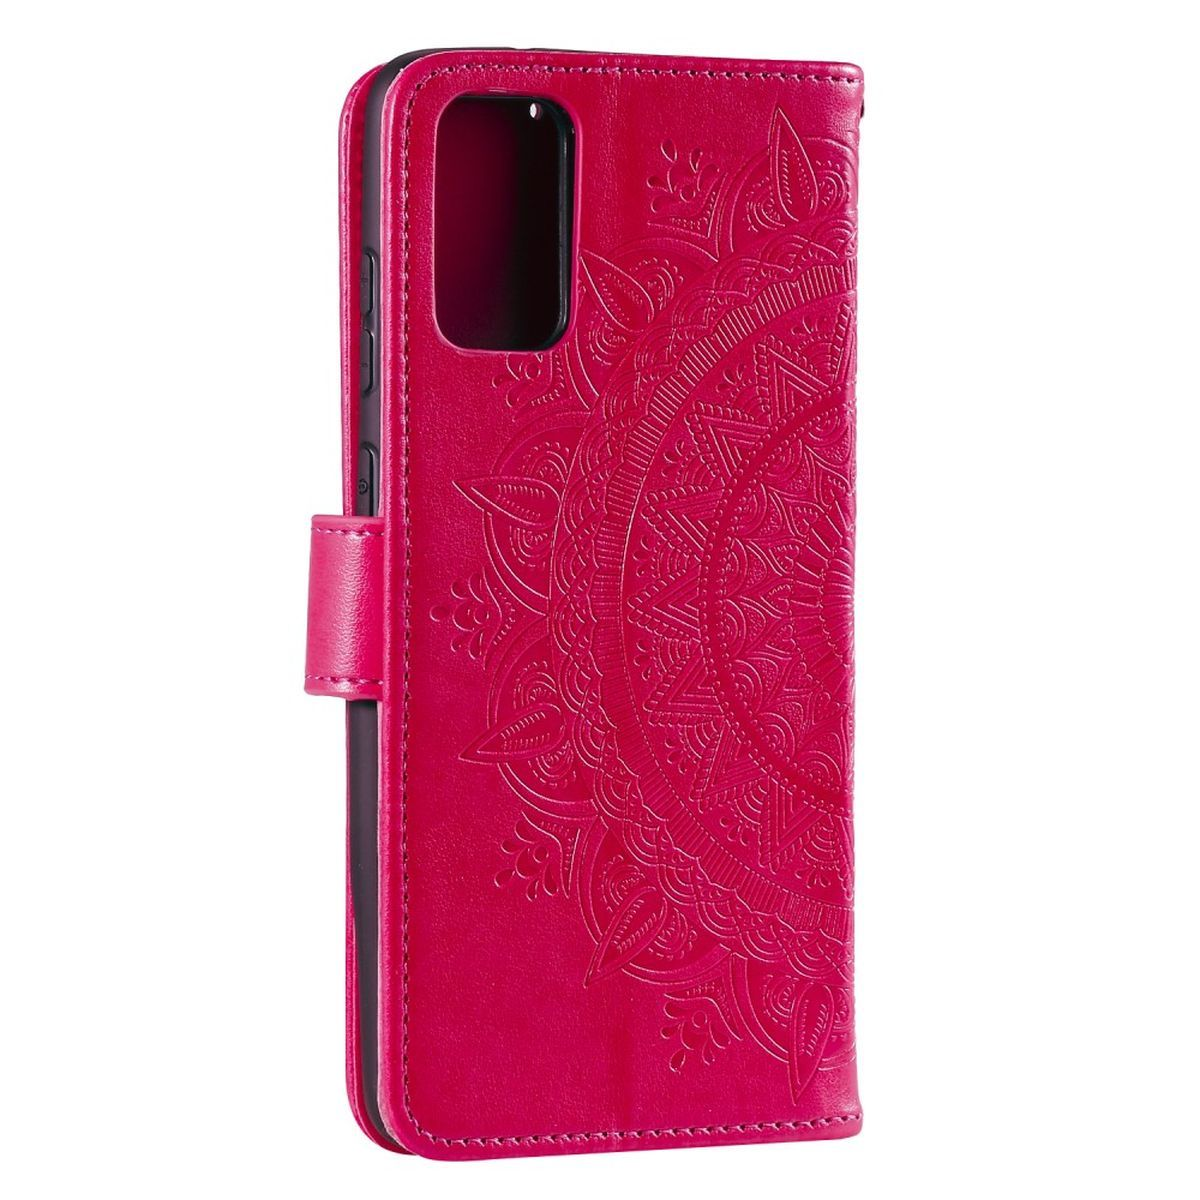 COVERKINGZ Klapphülle mit Galaxy Mandala Samsung, 5G, Muster, Bookcover, M23 Pink